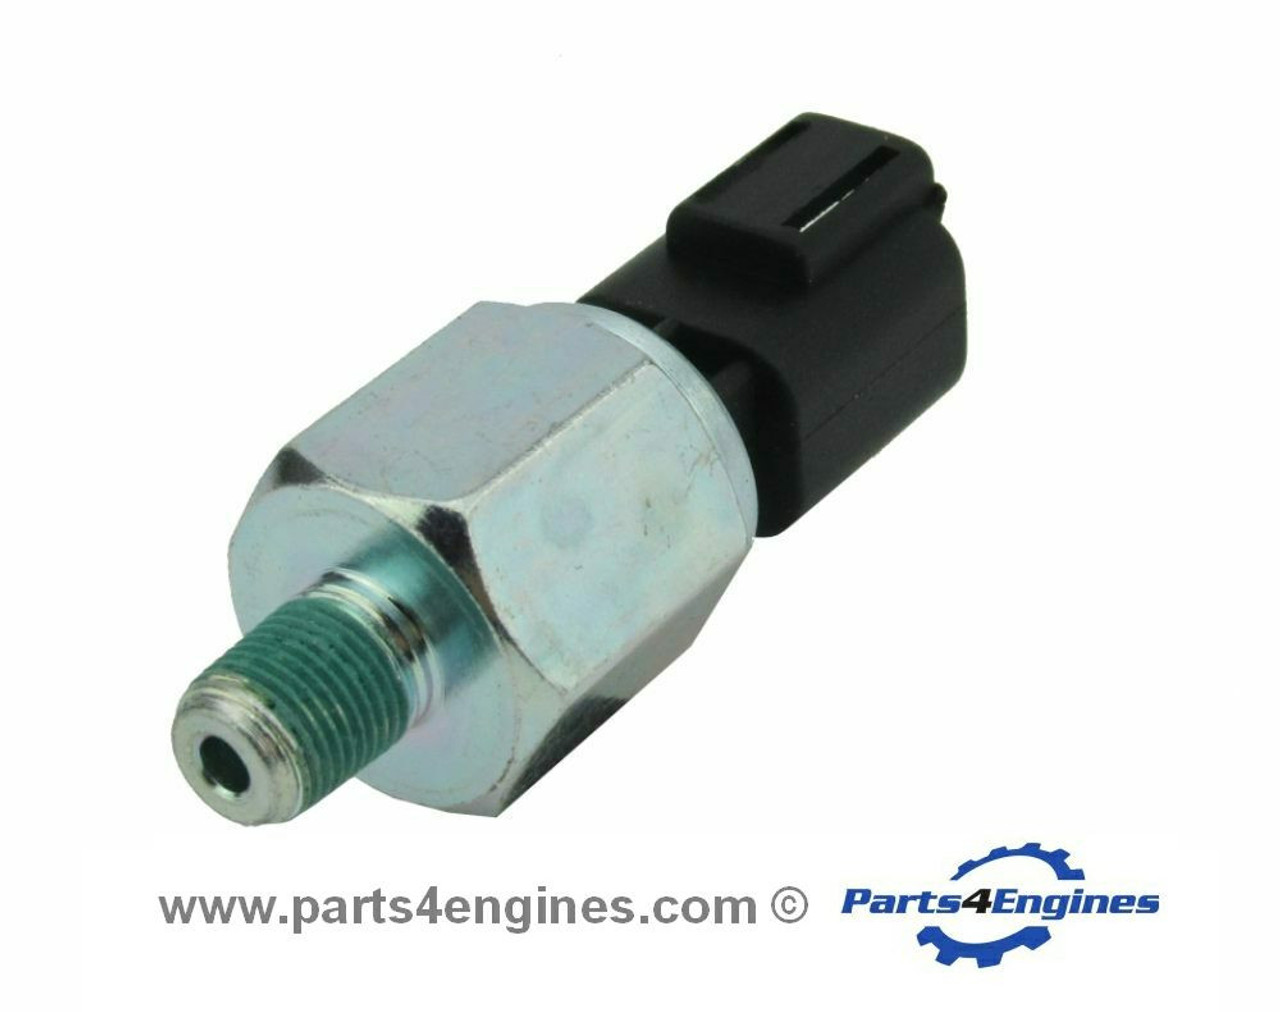 Volvo Penta D1-30 Oil pressure switch , from Parts4Engine.com